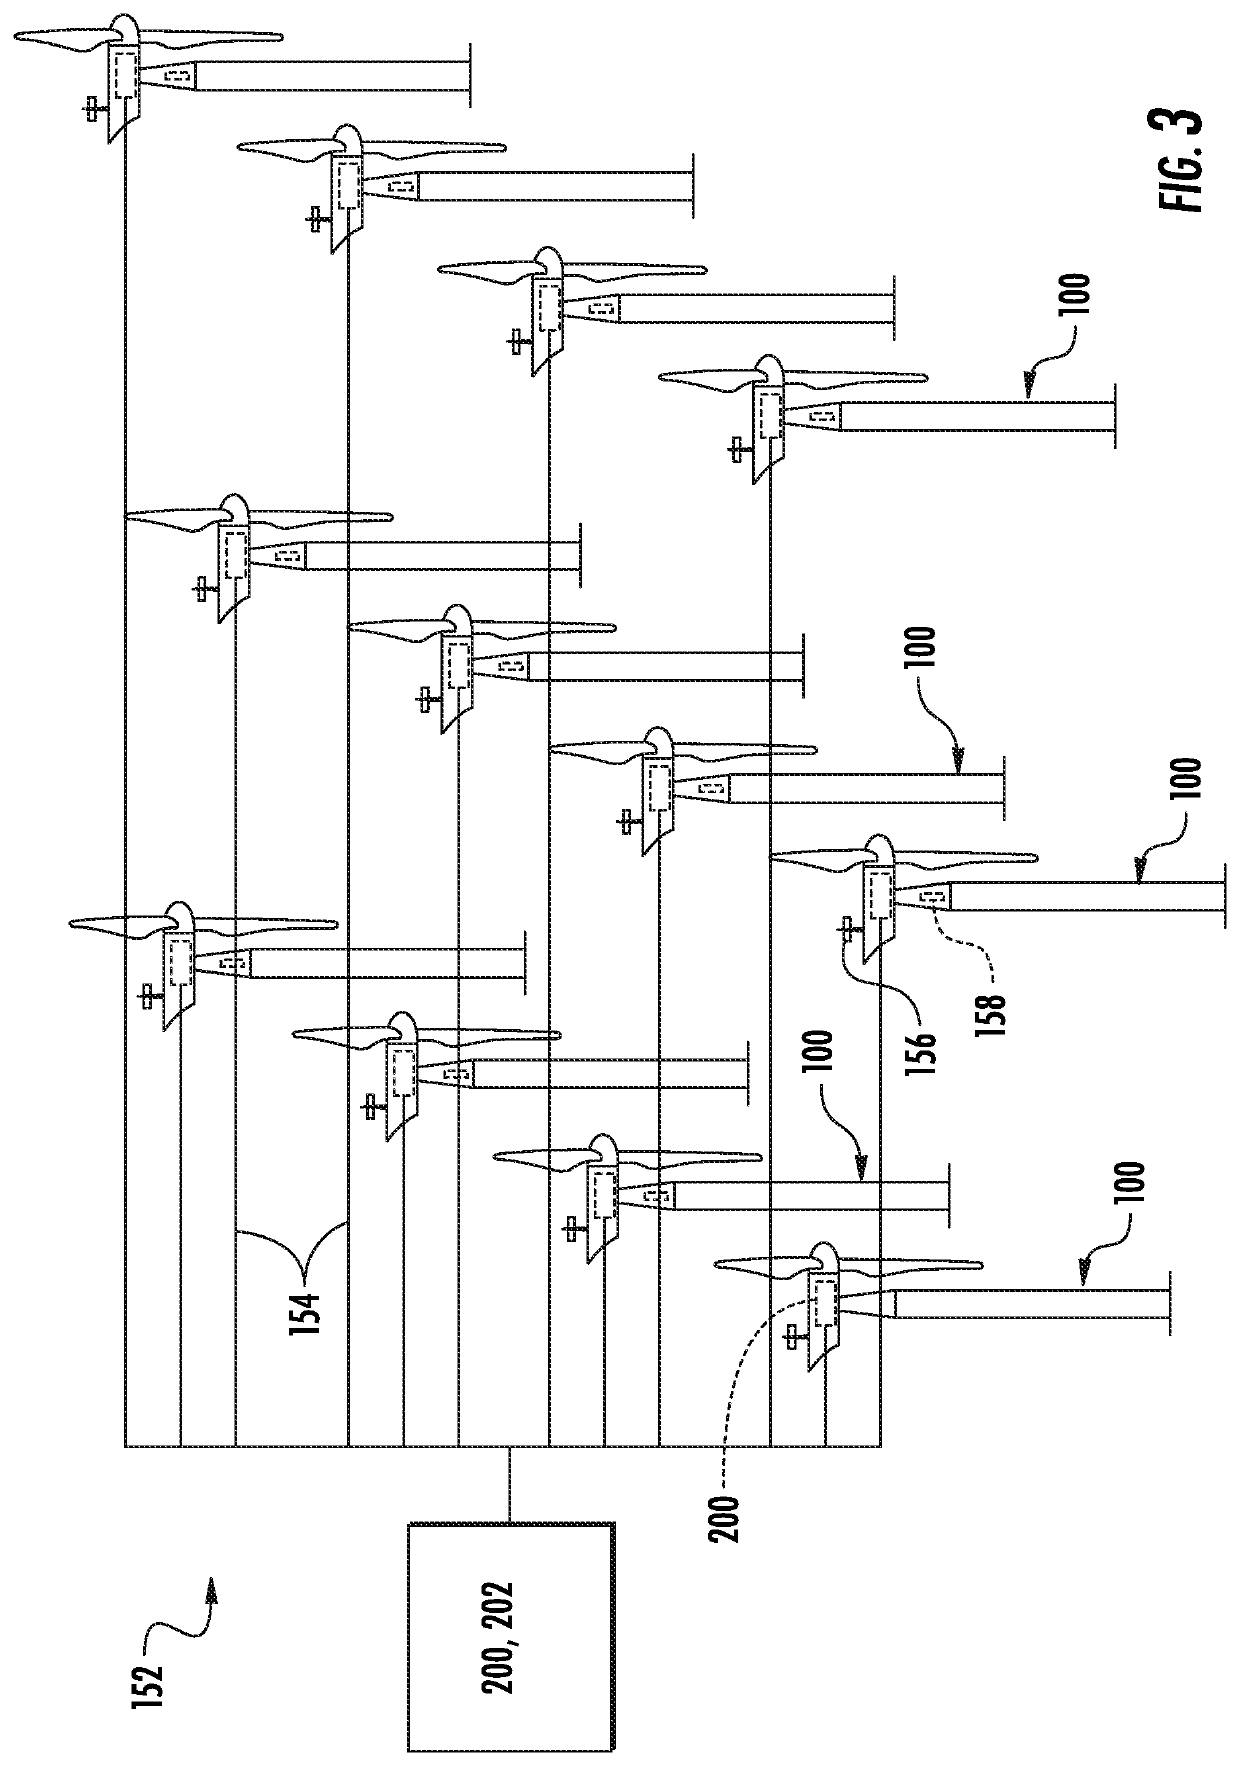 System and method for operating a wind turbine